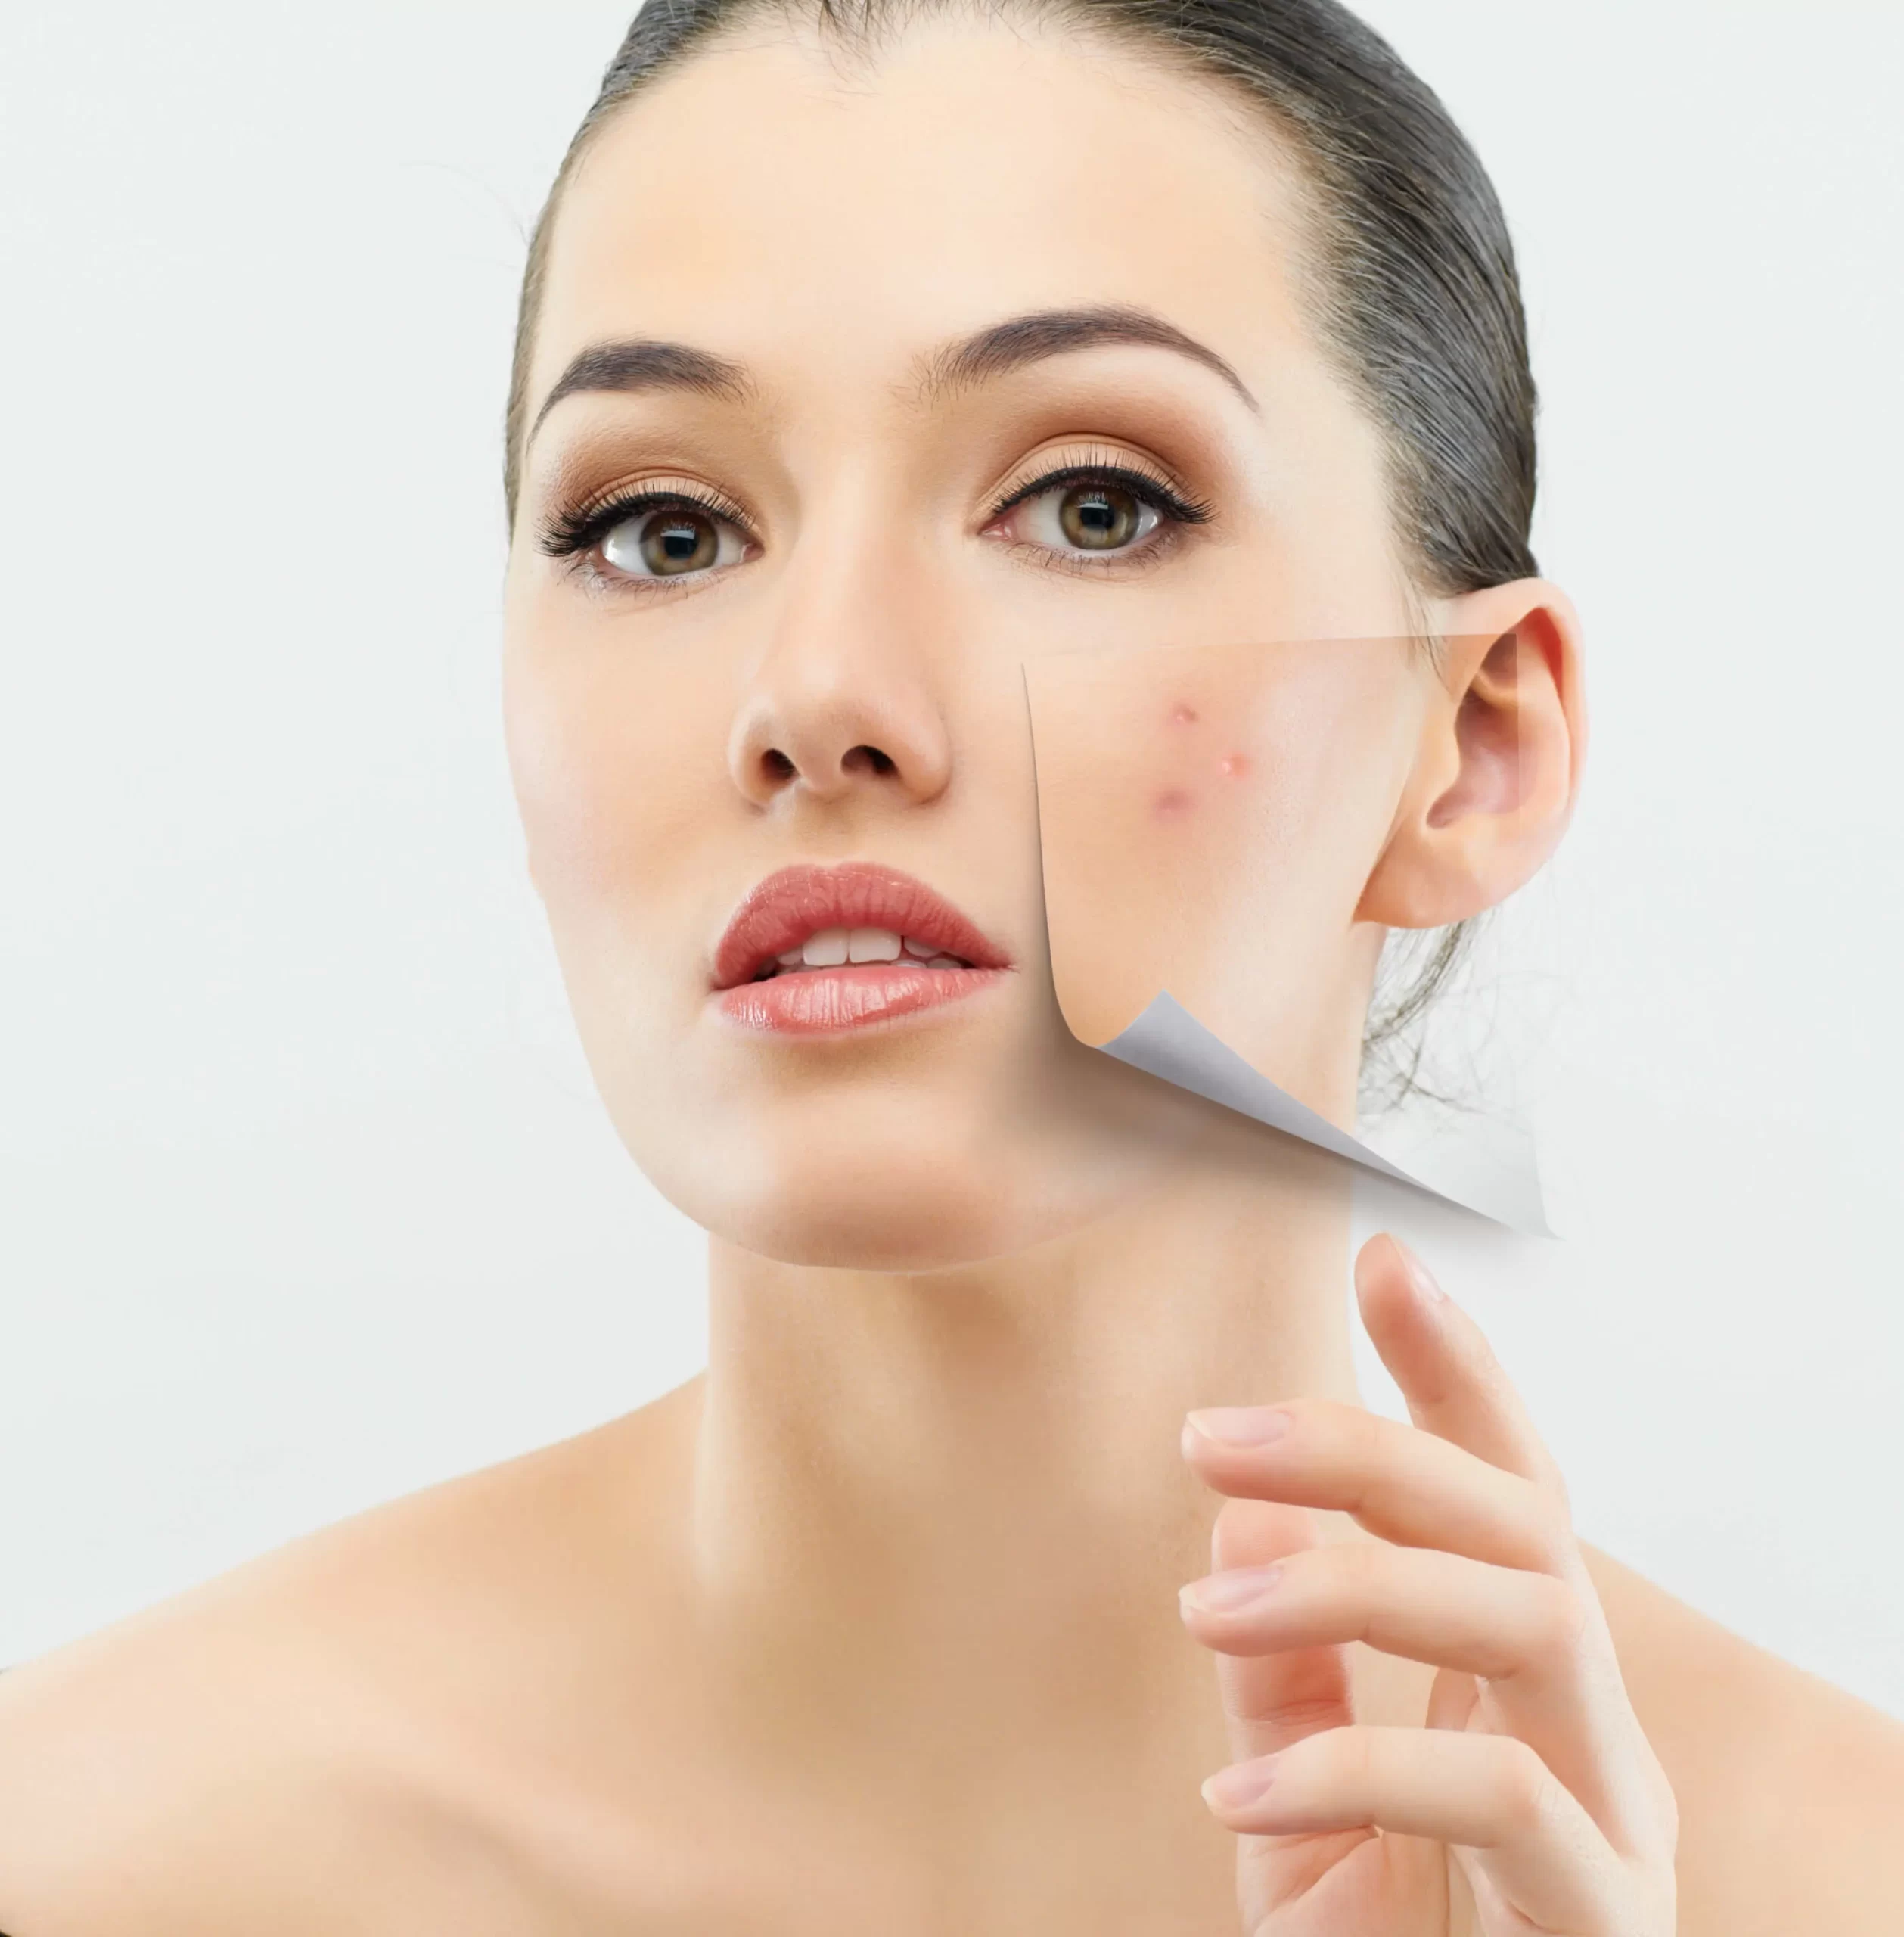 Dermatologist-Approved Tips for Reducing Pigmentation on the Skin